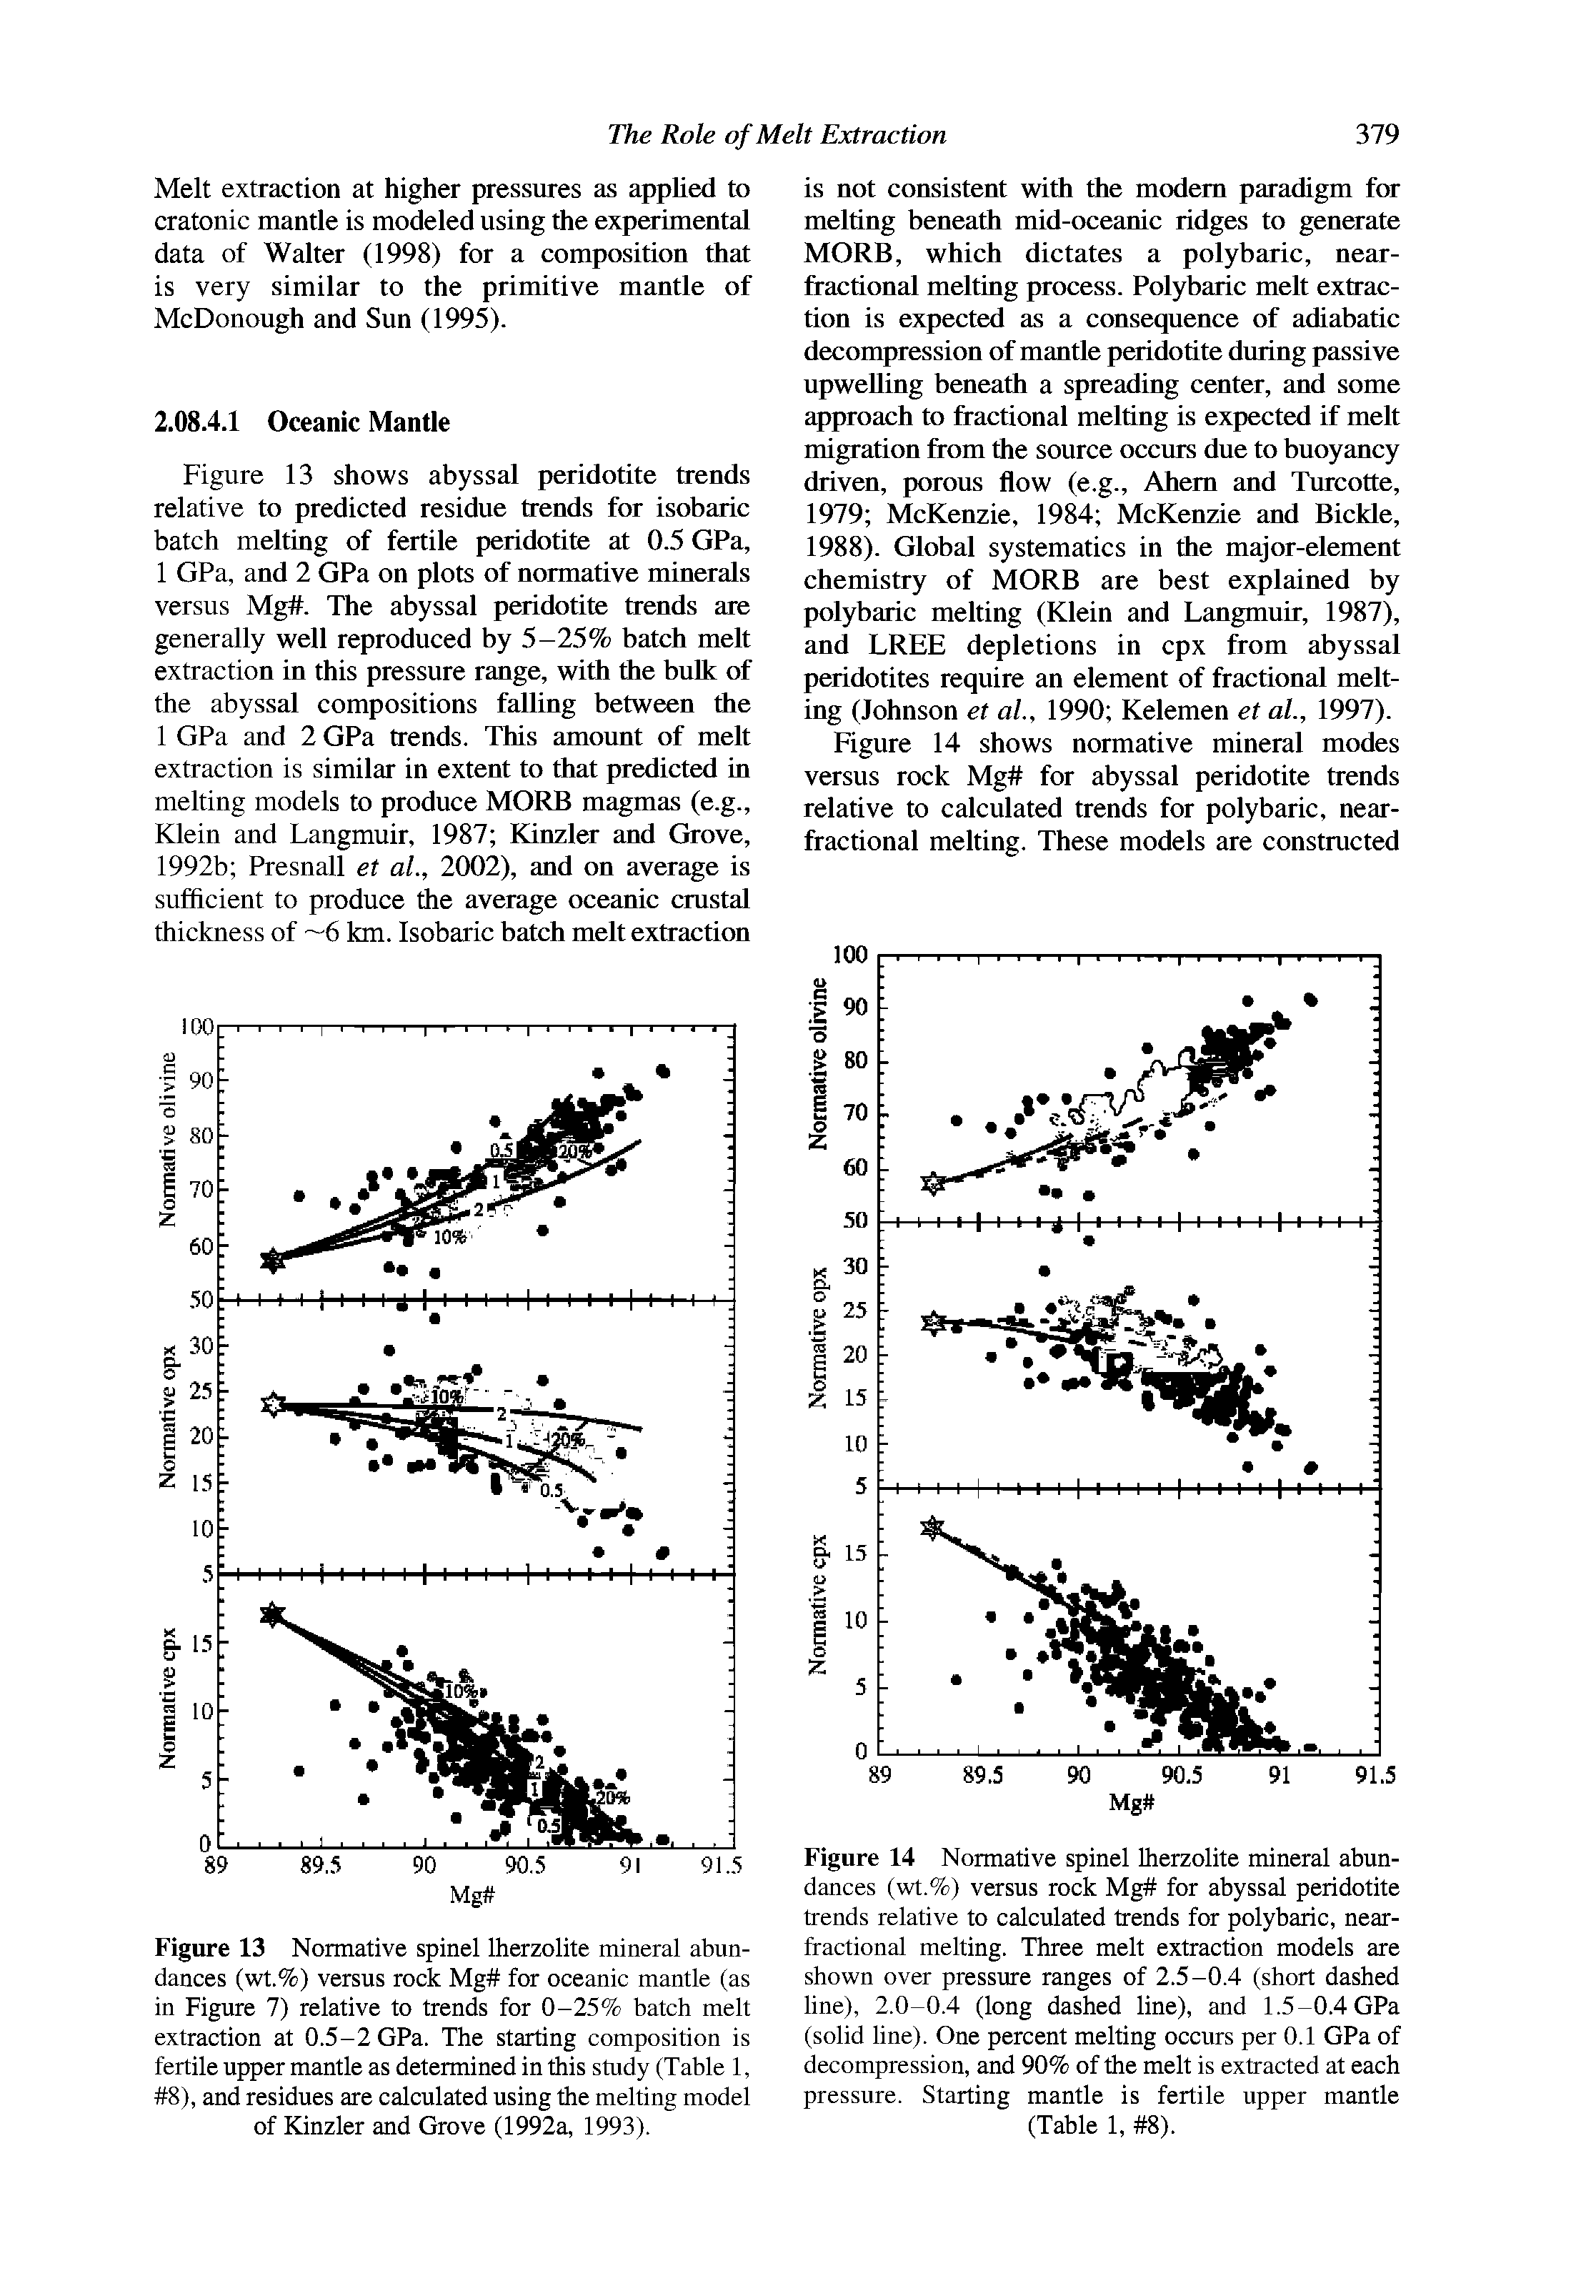 Figure 14 Normative spinel Iherzolite mineral abundances (wt.%) versus rock Mg for abyssal peridotite trends relative to calculated trends for polybaric, near-fractional melting. Three melt extraction models are shown over pressure ranges of 2.5-0.4 (short dashed line), 2.0-0.4 (long dashed line), and 1.5-0.4GPa (solid line). One percent melting occurs per 0.1 GPa of decompression, and 90% of the melt is extracted at each pressure. Starting mantle is fertile upper mantle (Table 1, 8).